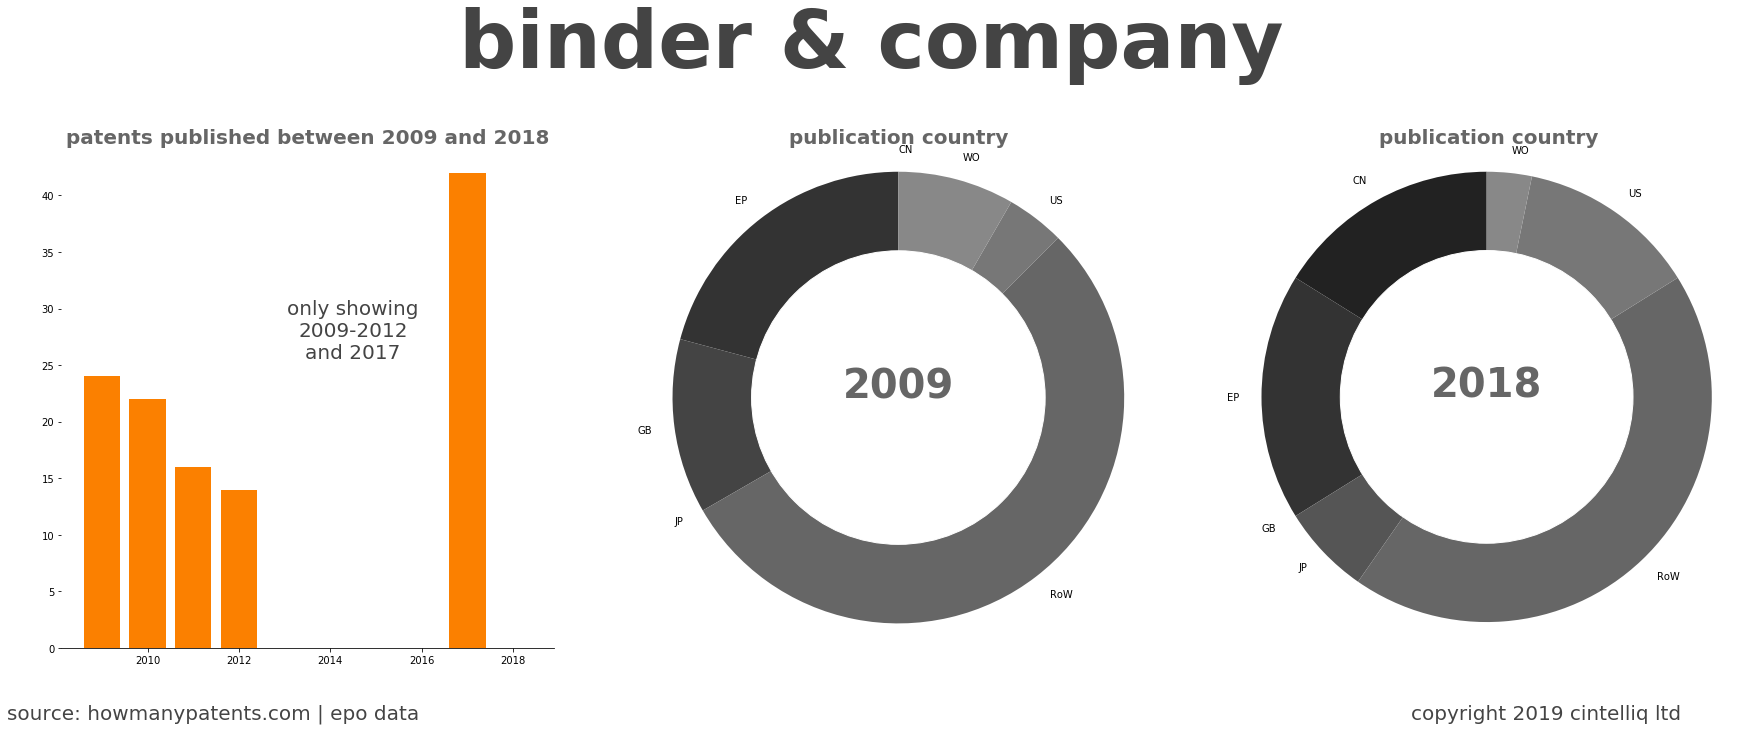 summary of patents for Binder & Company